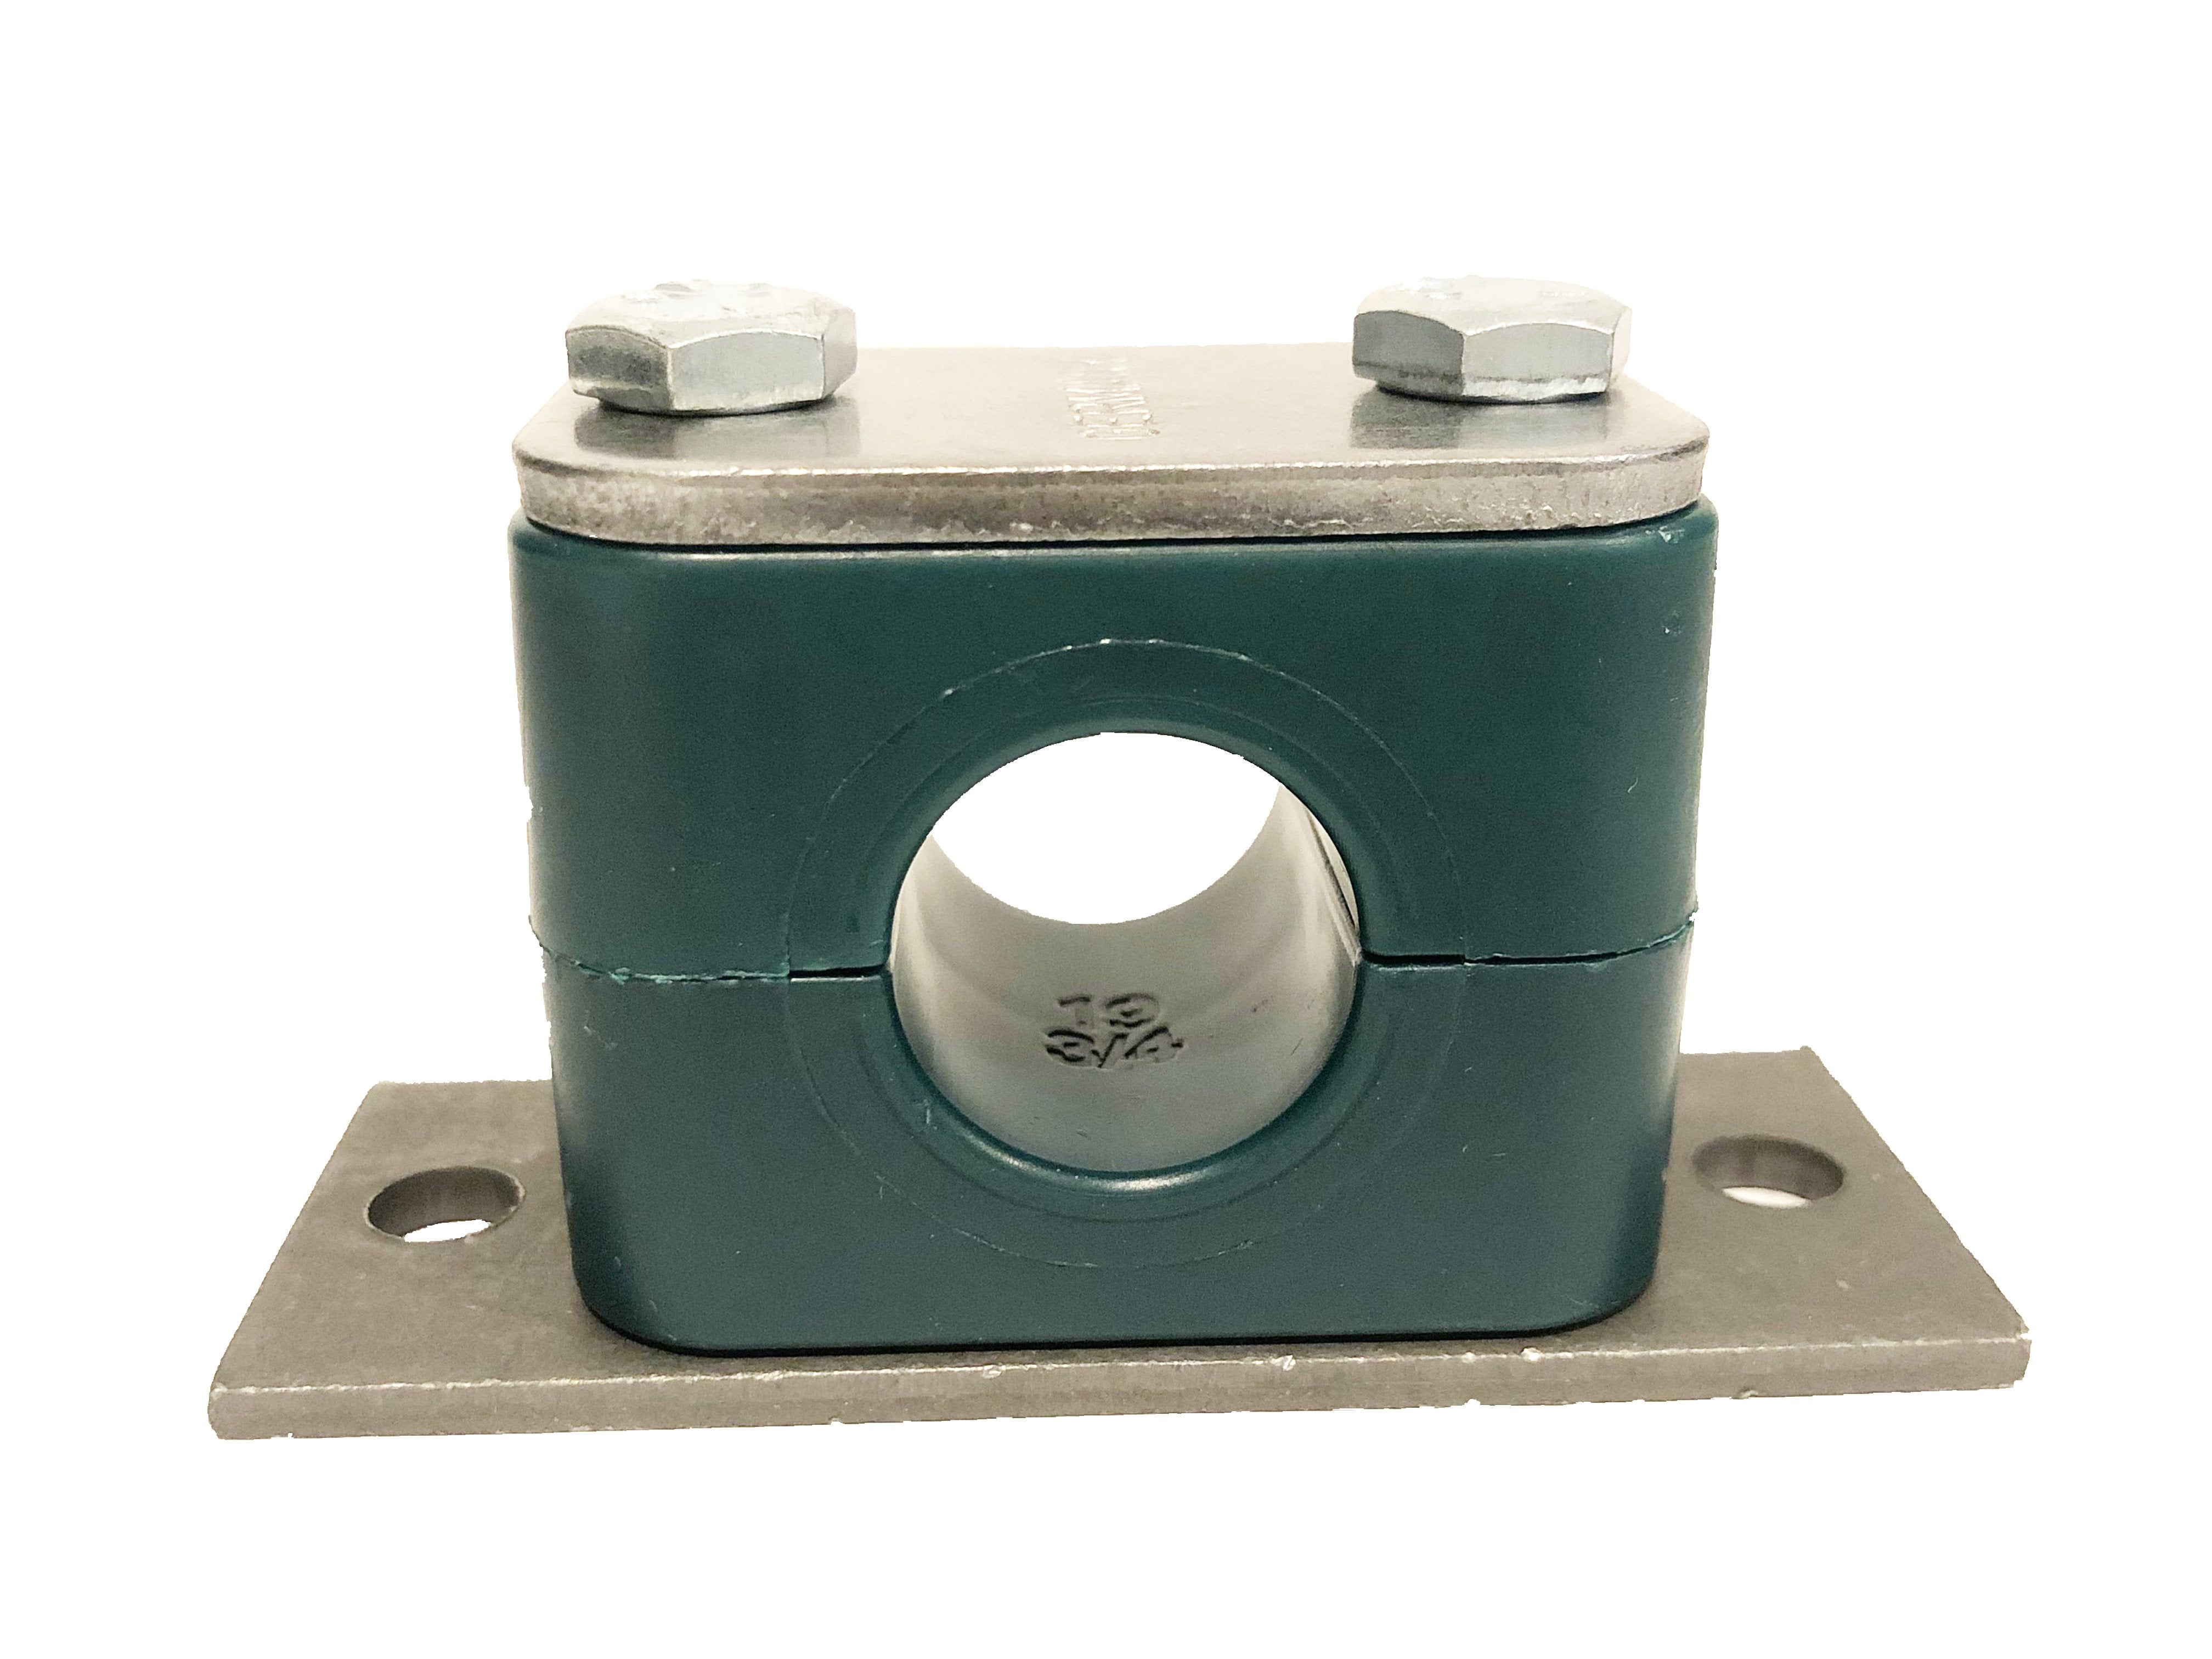 SPV-217.2-PP-H-DP-AS-U-W10 : Stauff Clamp, Elongated Weld Plate, 0.677" (17.2mm) OD, for 3/8" Pipe, Green PP Insert, Smooth Interior, Carbon Steel